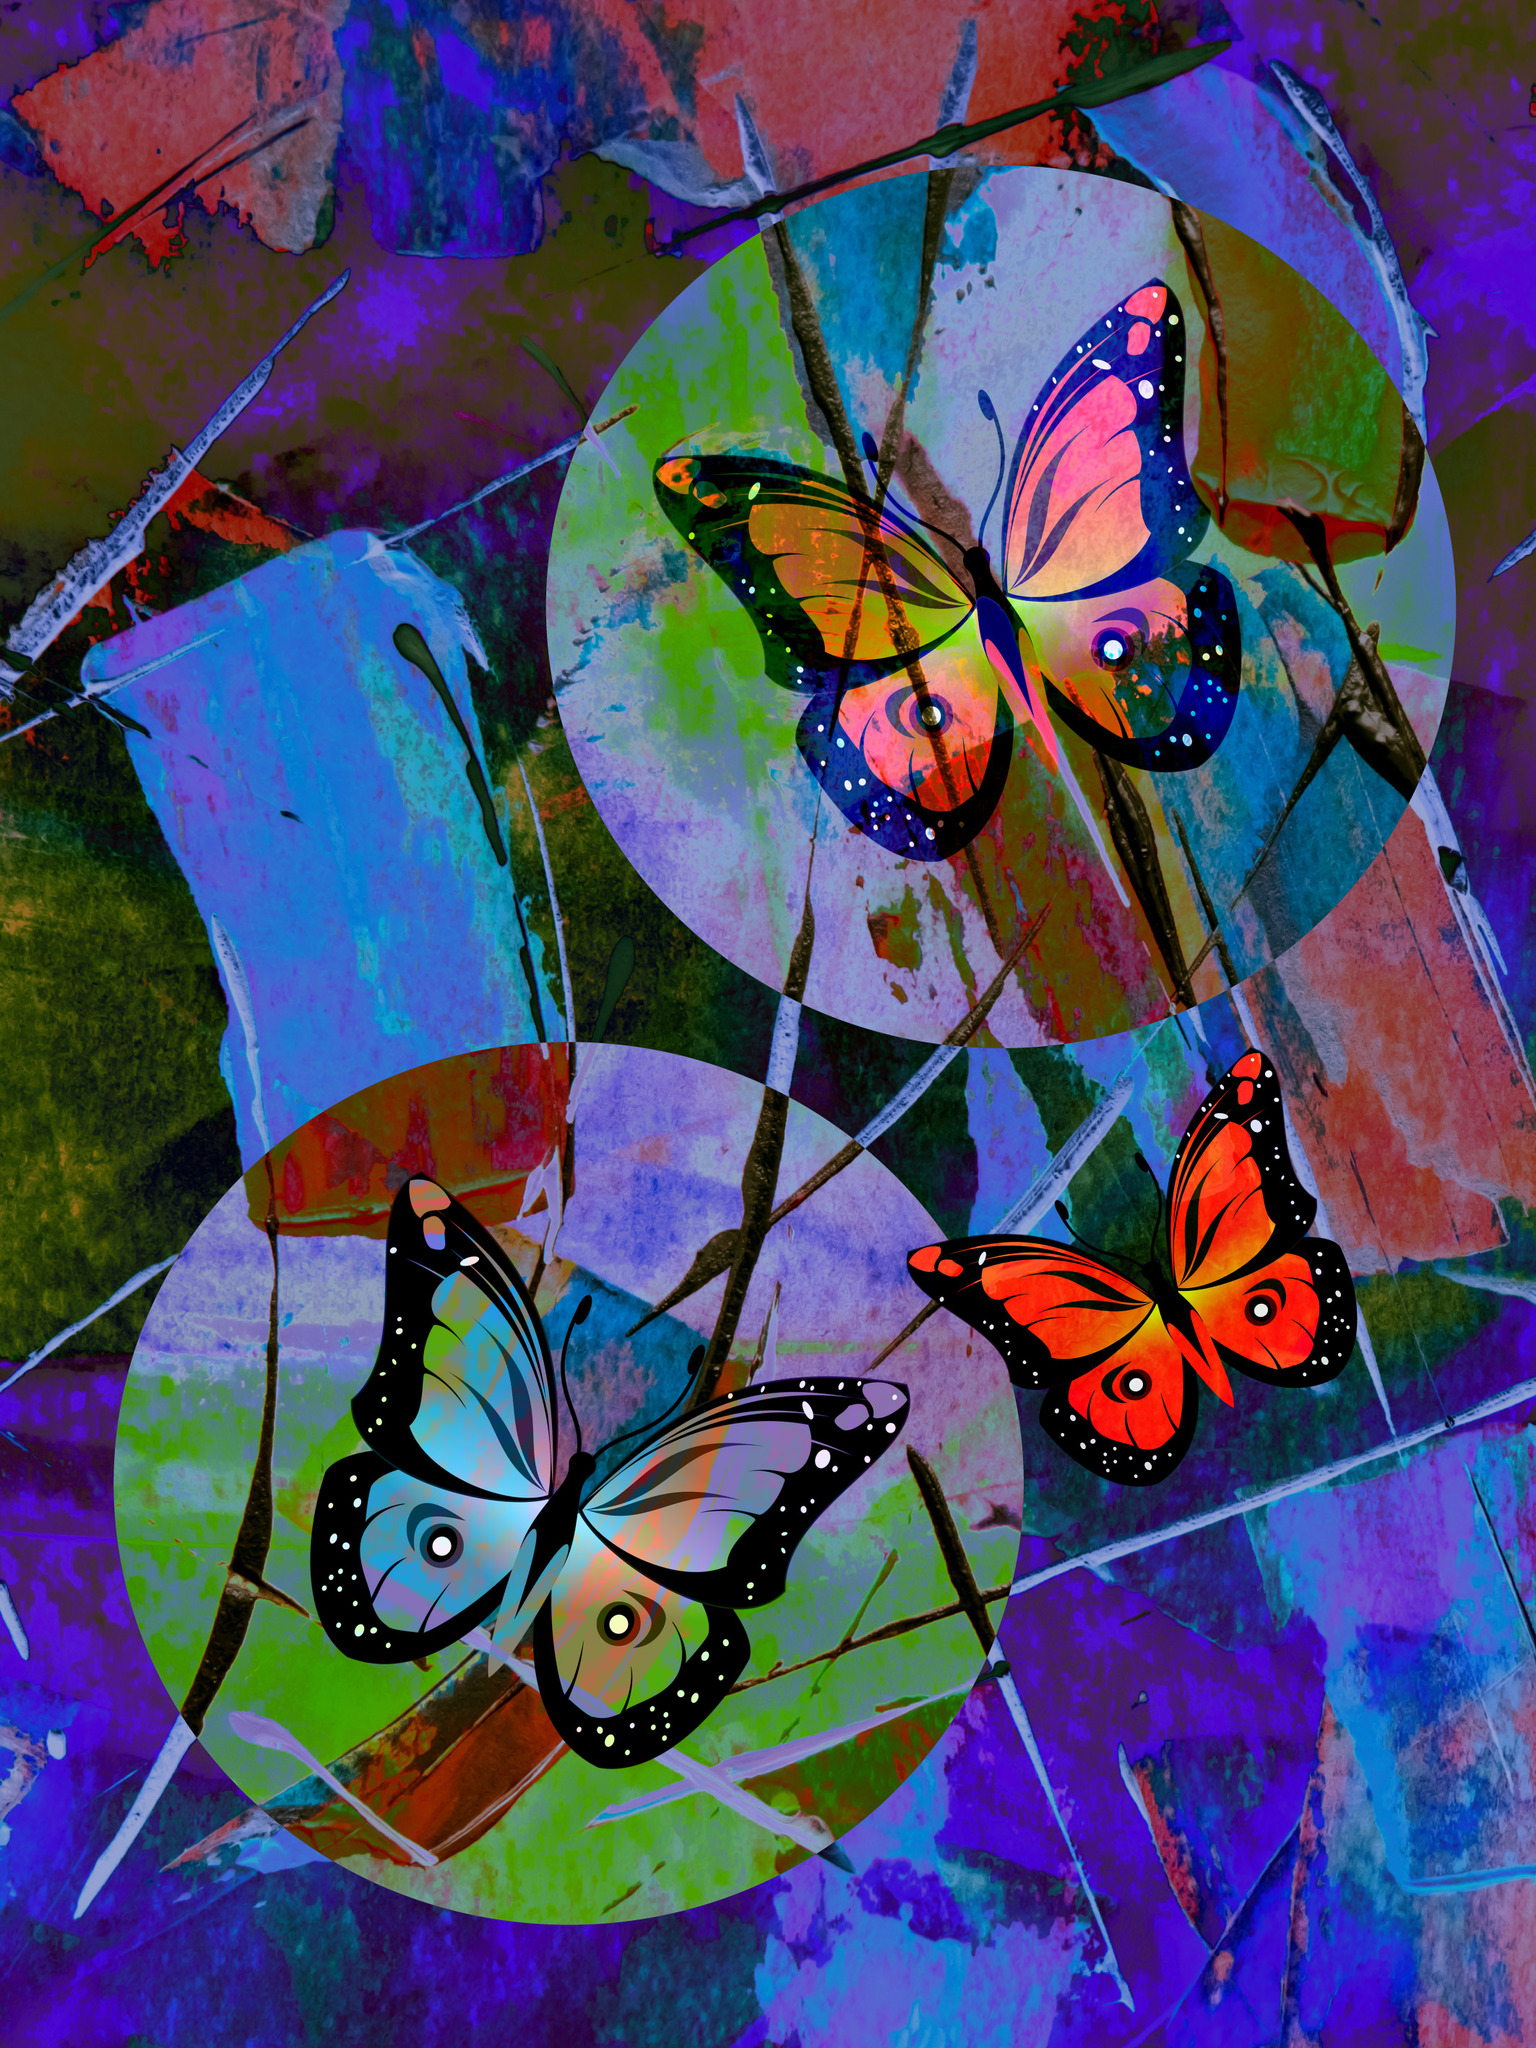 Graphic Art "Abstract butterflies in an abstract world"